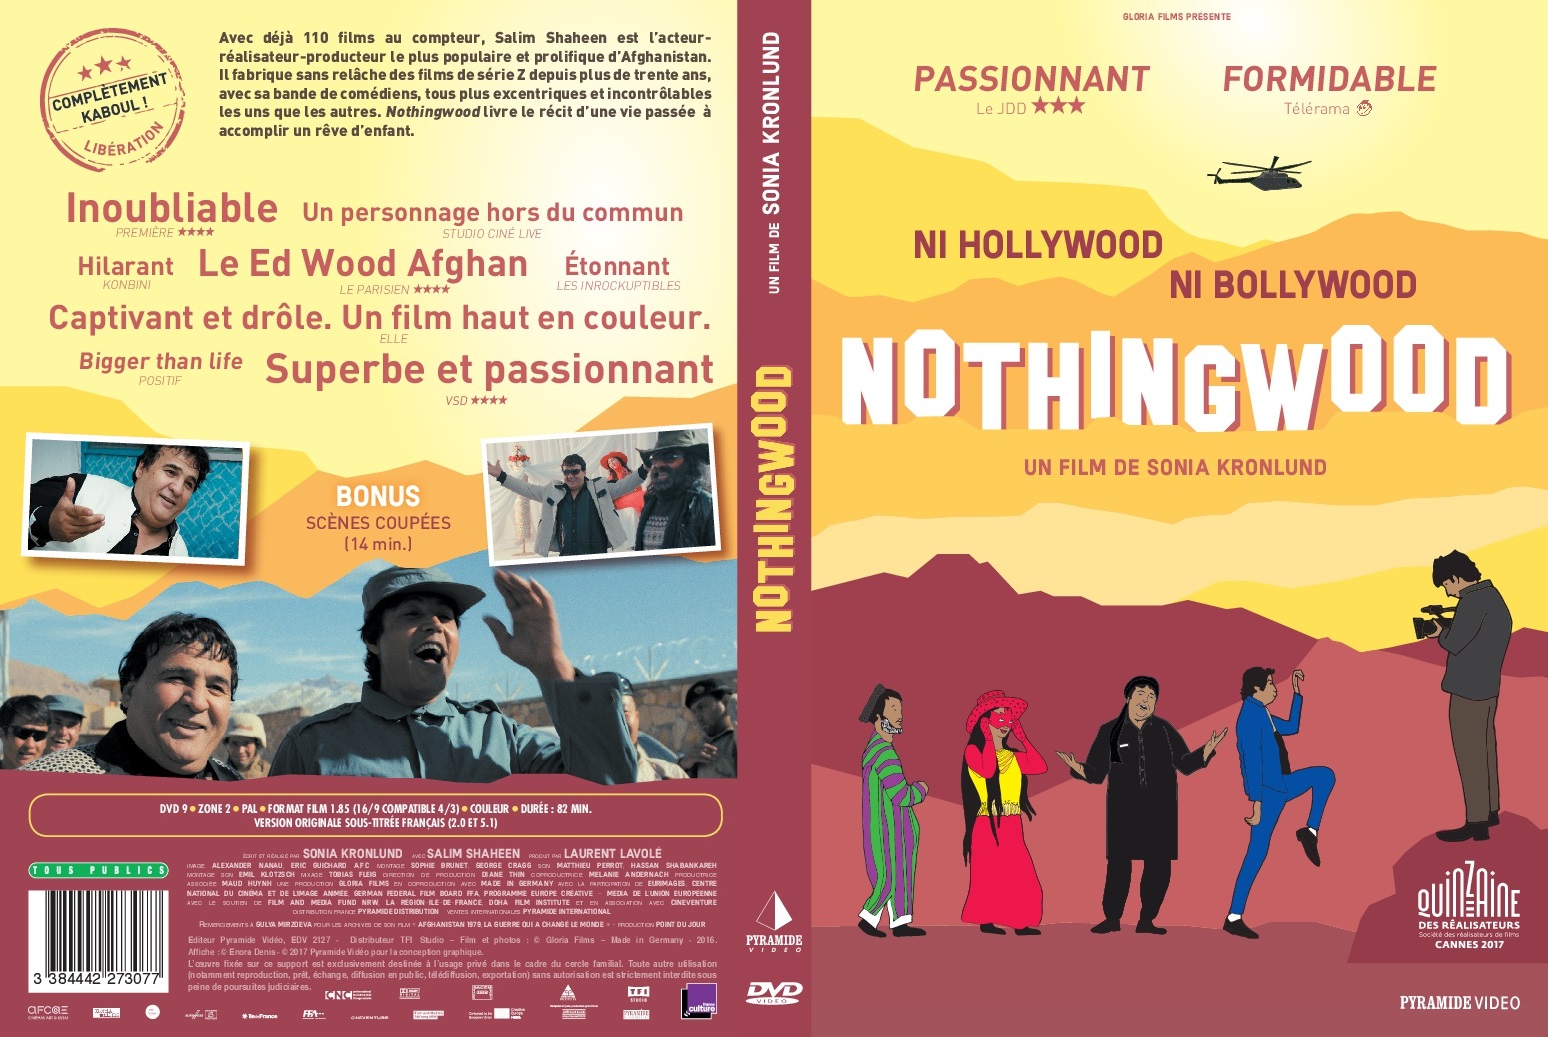 Jaquette DVD Nothingwood